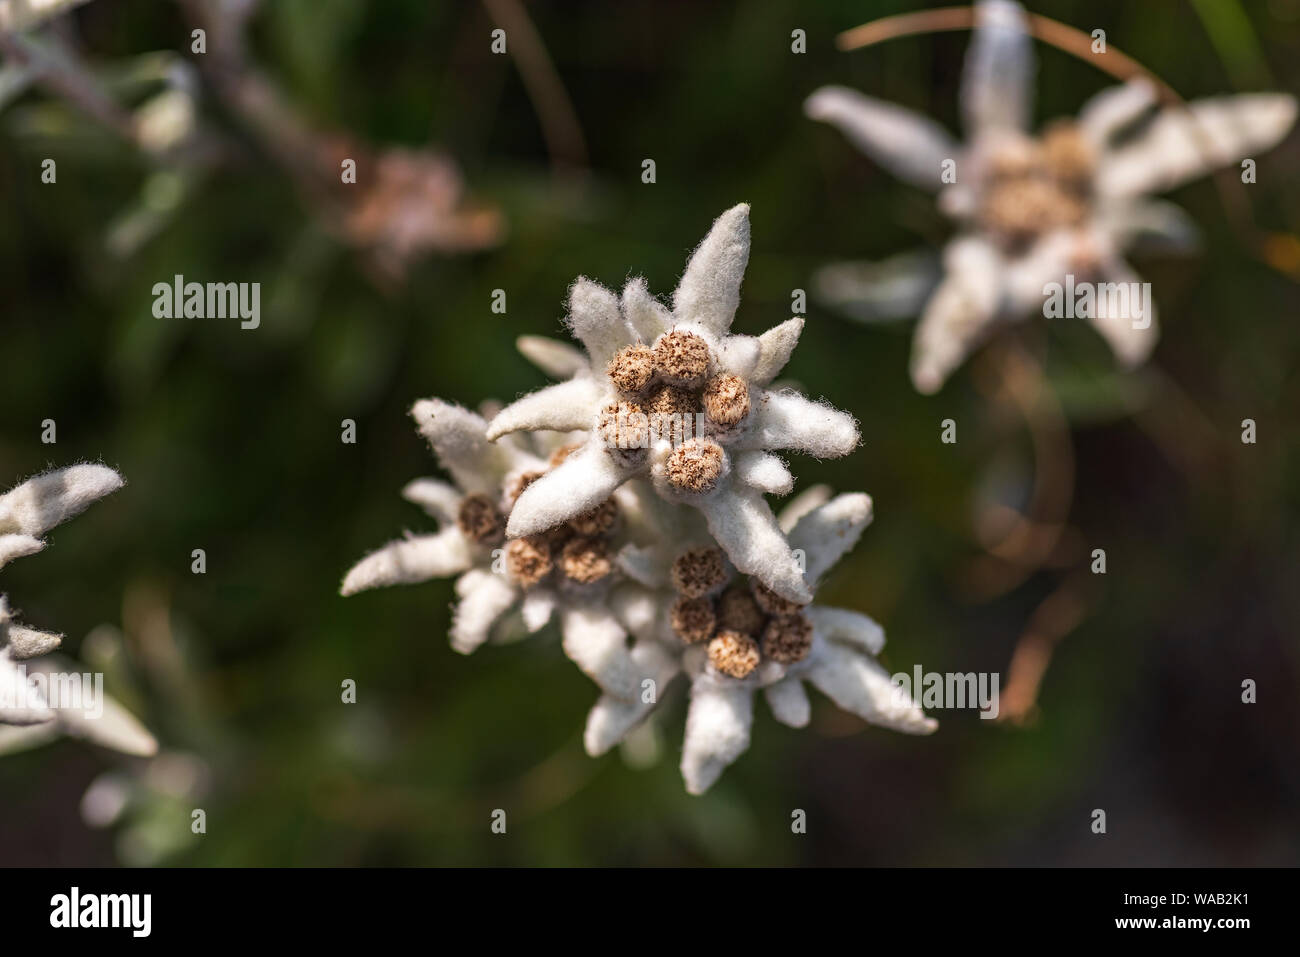 Leontopodium nivale, commonly called Edelweiss - famous protected mountain flower Stock Photo